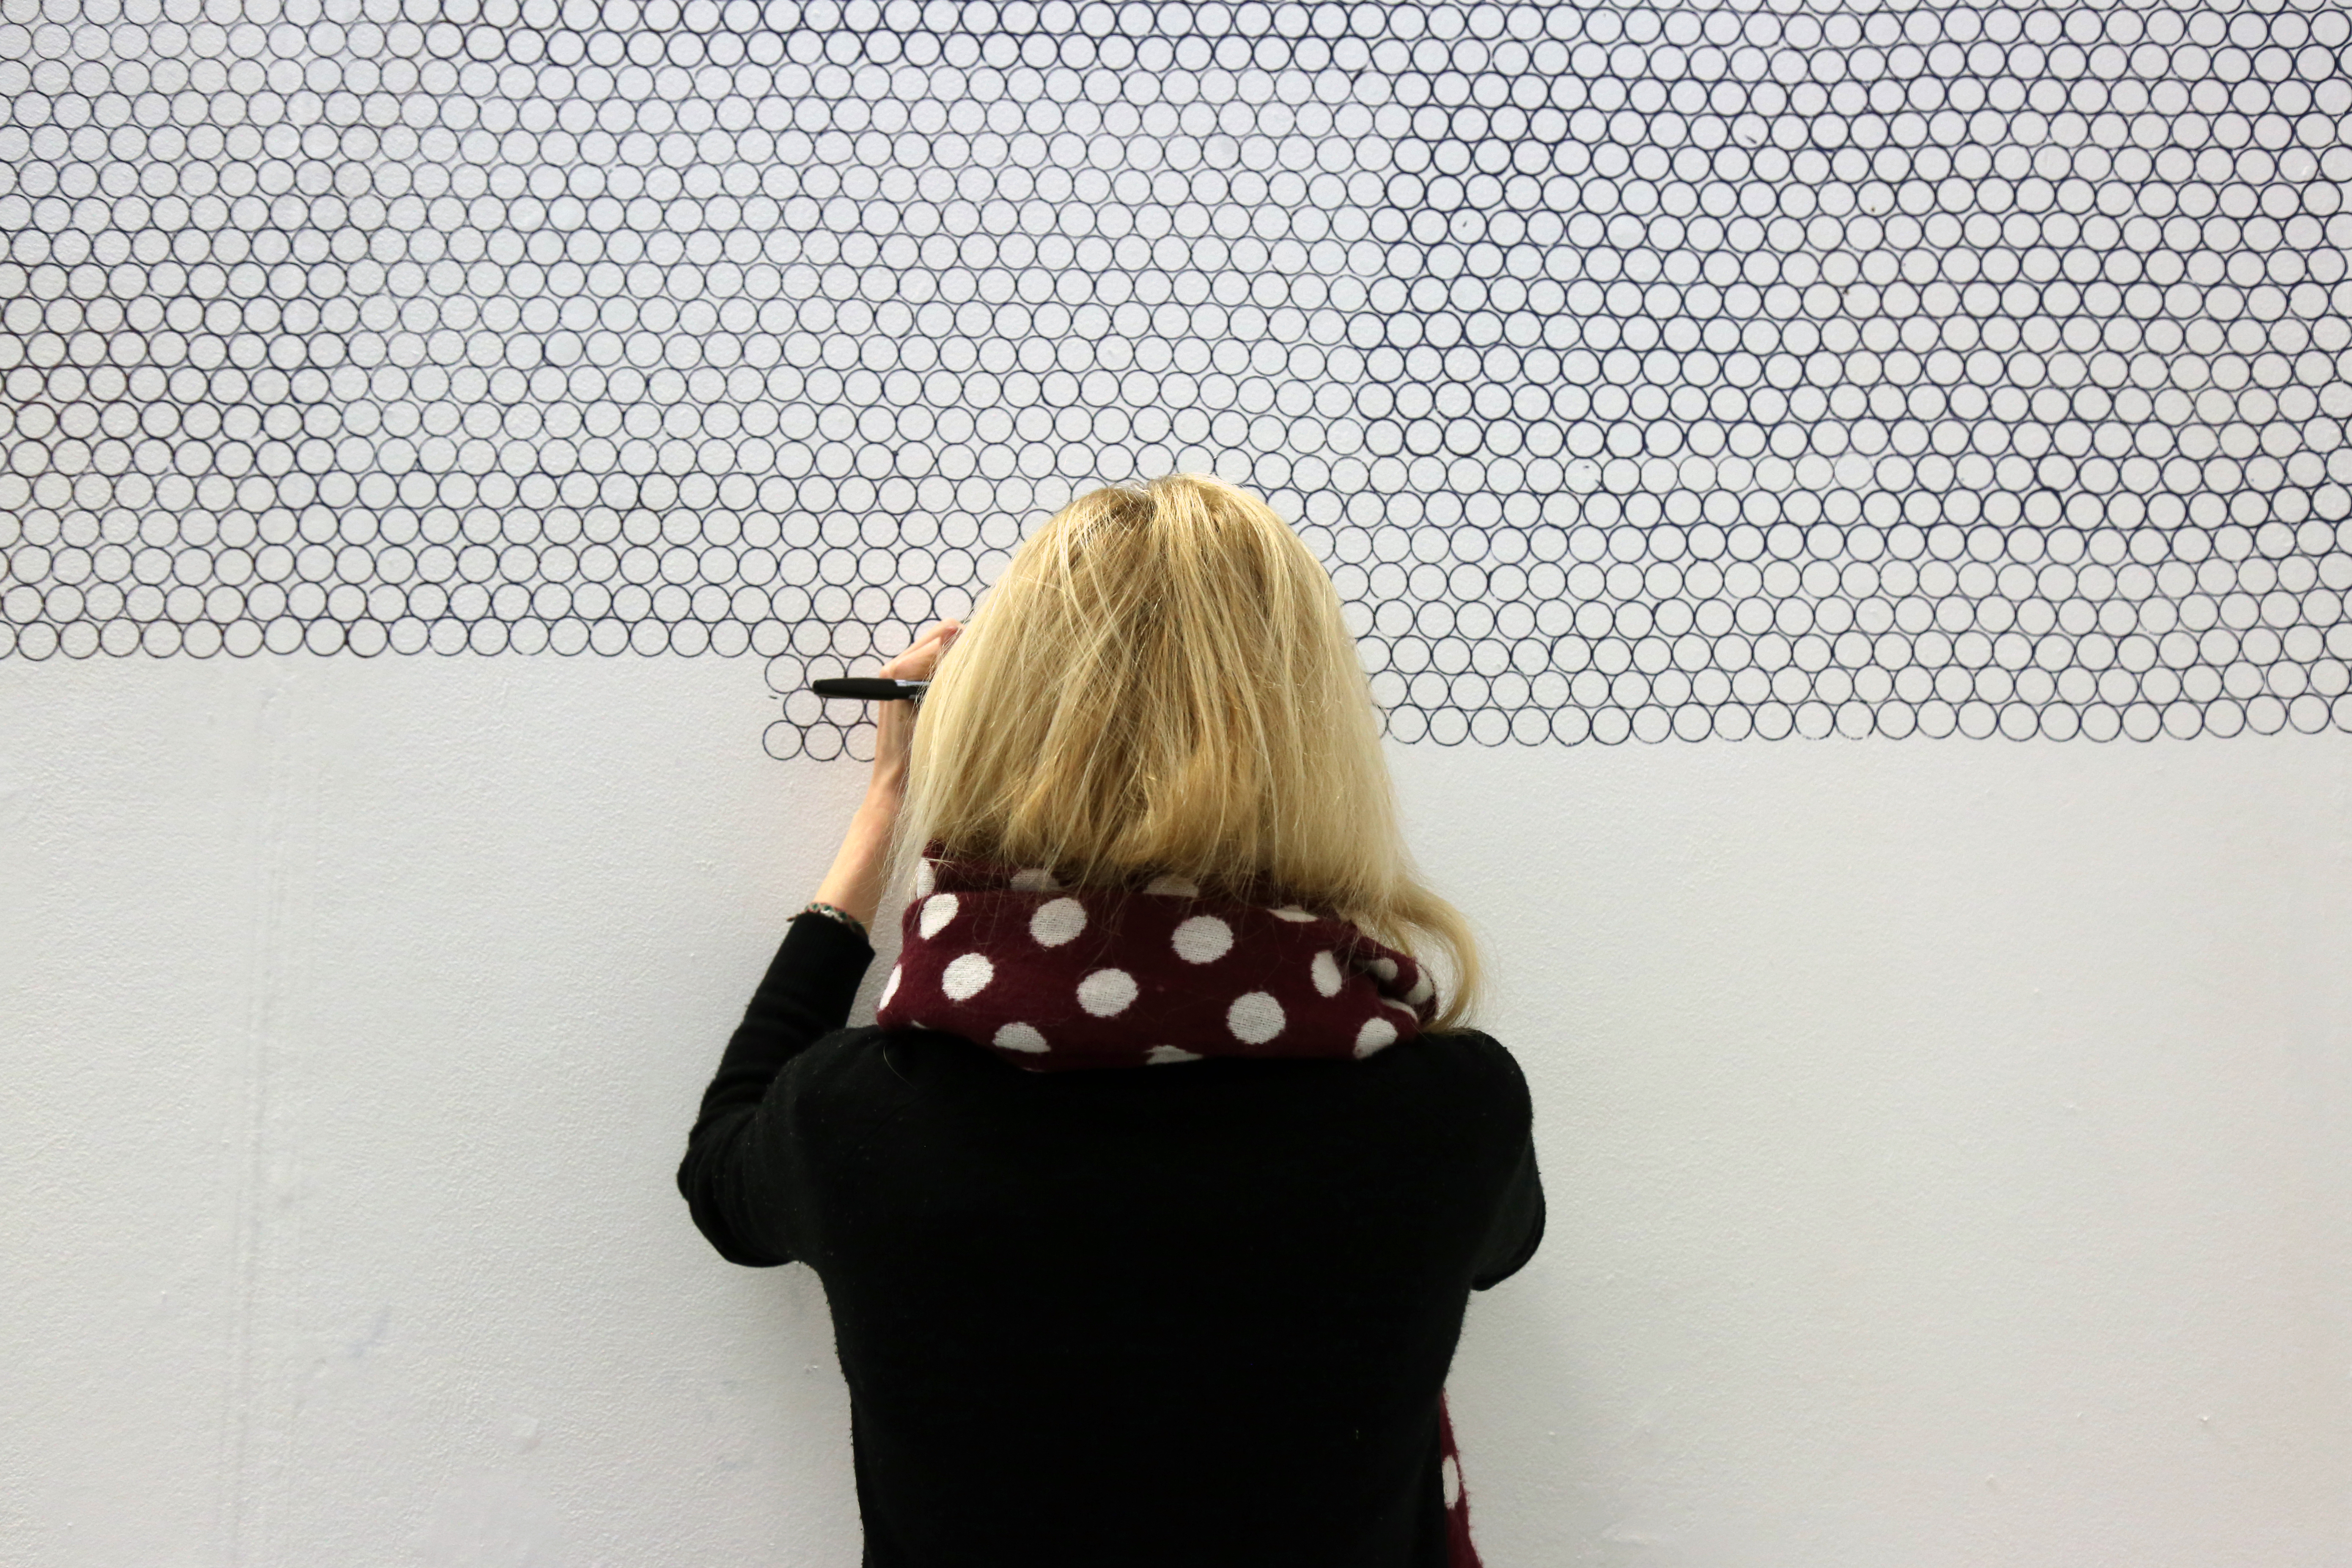 Amelia repetitively draws round a penny coin in continuous lines with a black pen onto a white wall. She is stood with her back to the camera wearing a black dress and is also wearing a scarf that mimics the circles she is creating.